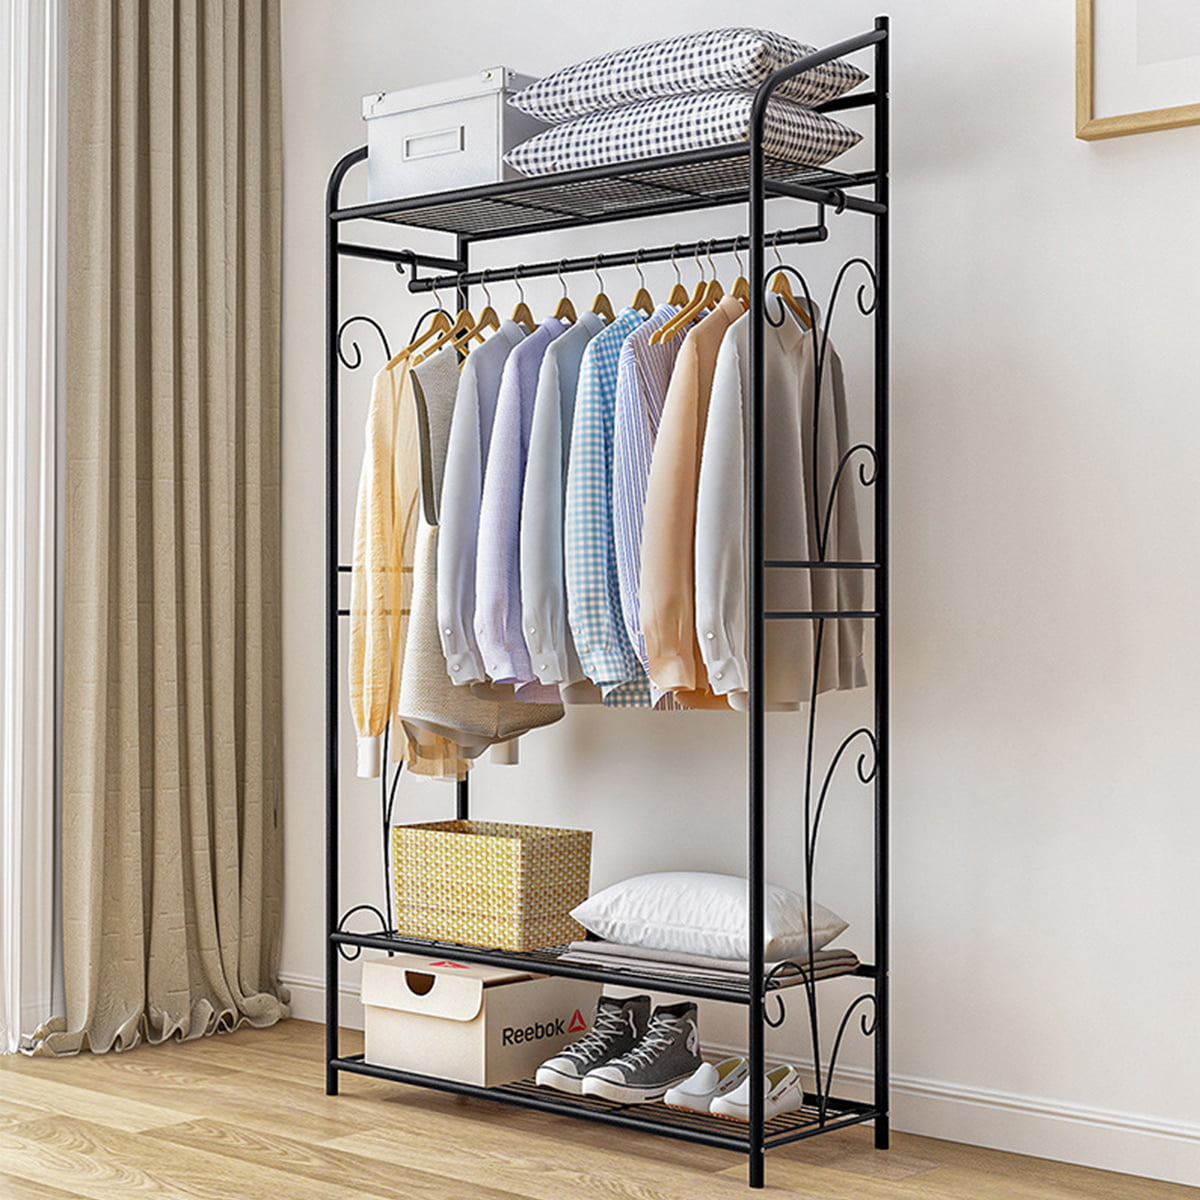 Details about   Stainless Steel Clothes Hanger Shoe Storage Rail Rack Garment Organizer Stand 